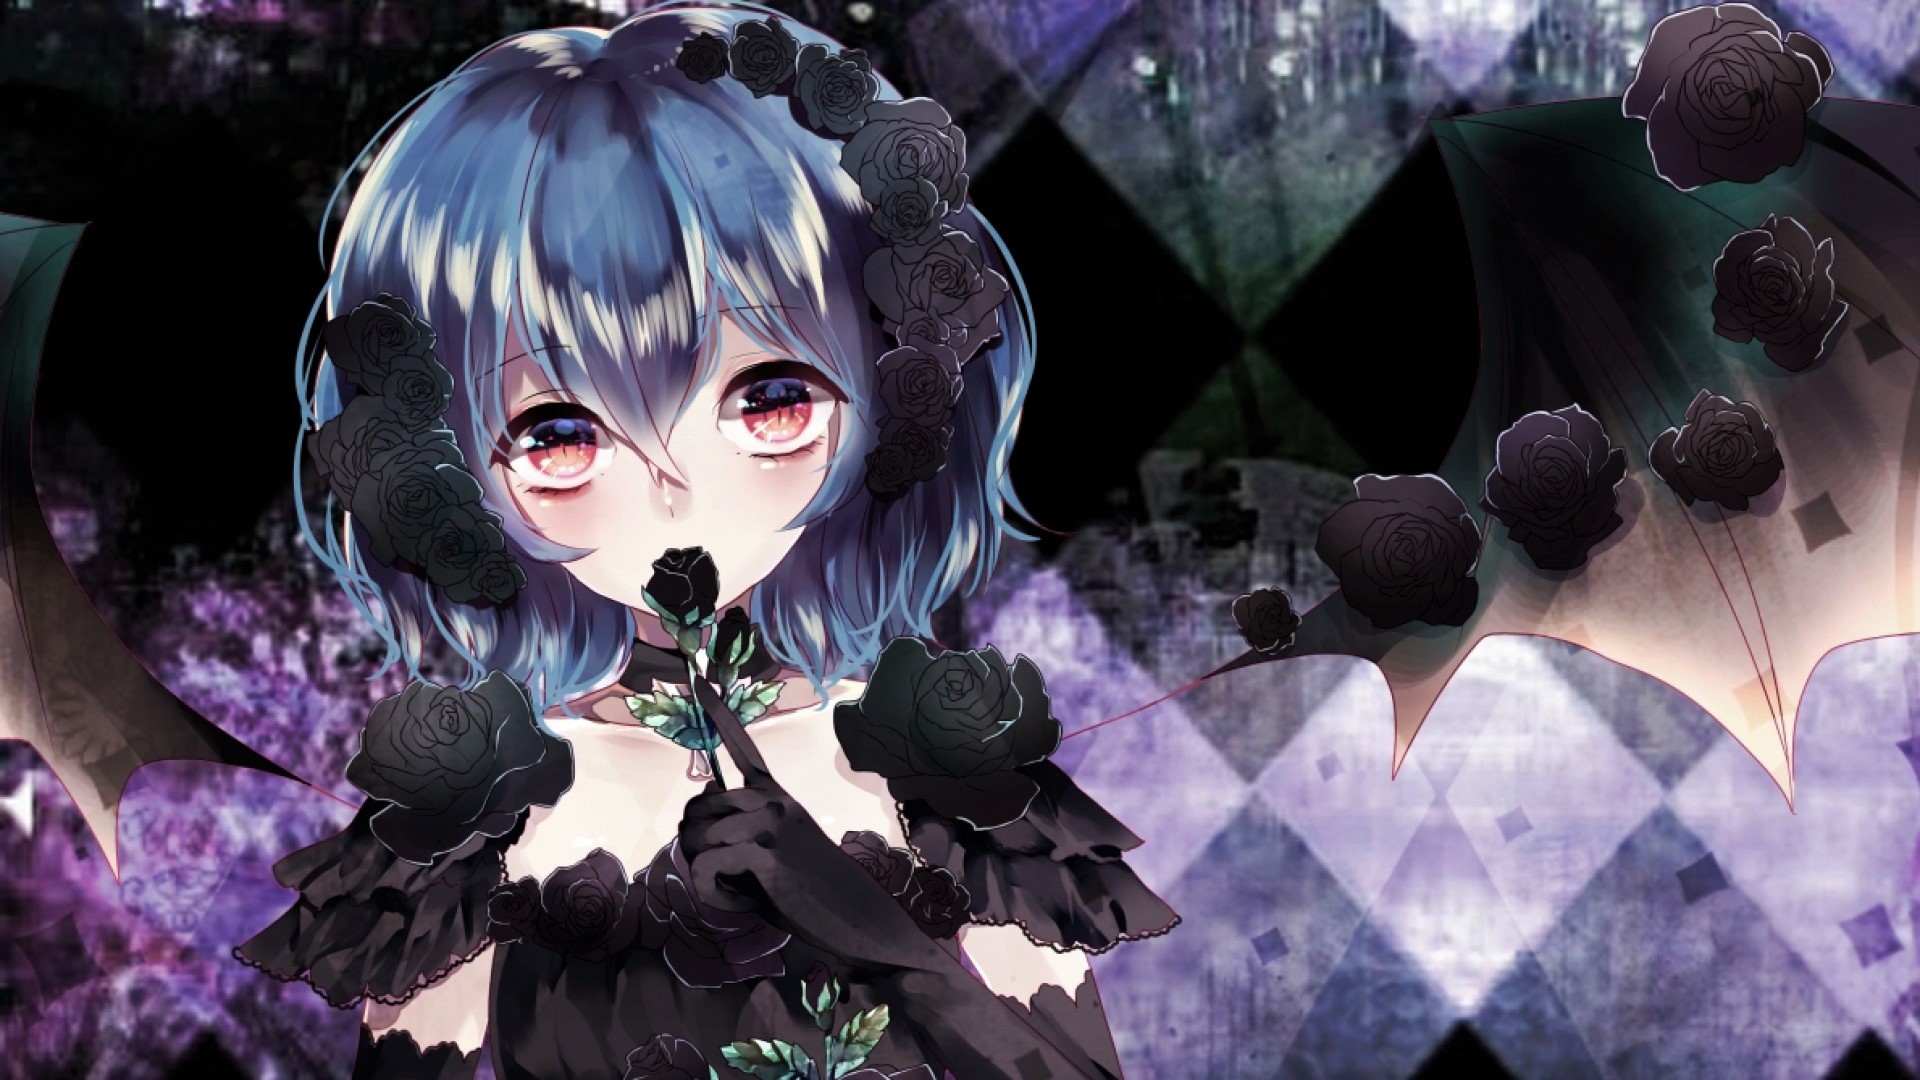 Art agent Anime Gothic art, gothic, purple, cg Artwork, violet png | PNGWing